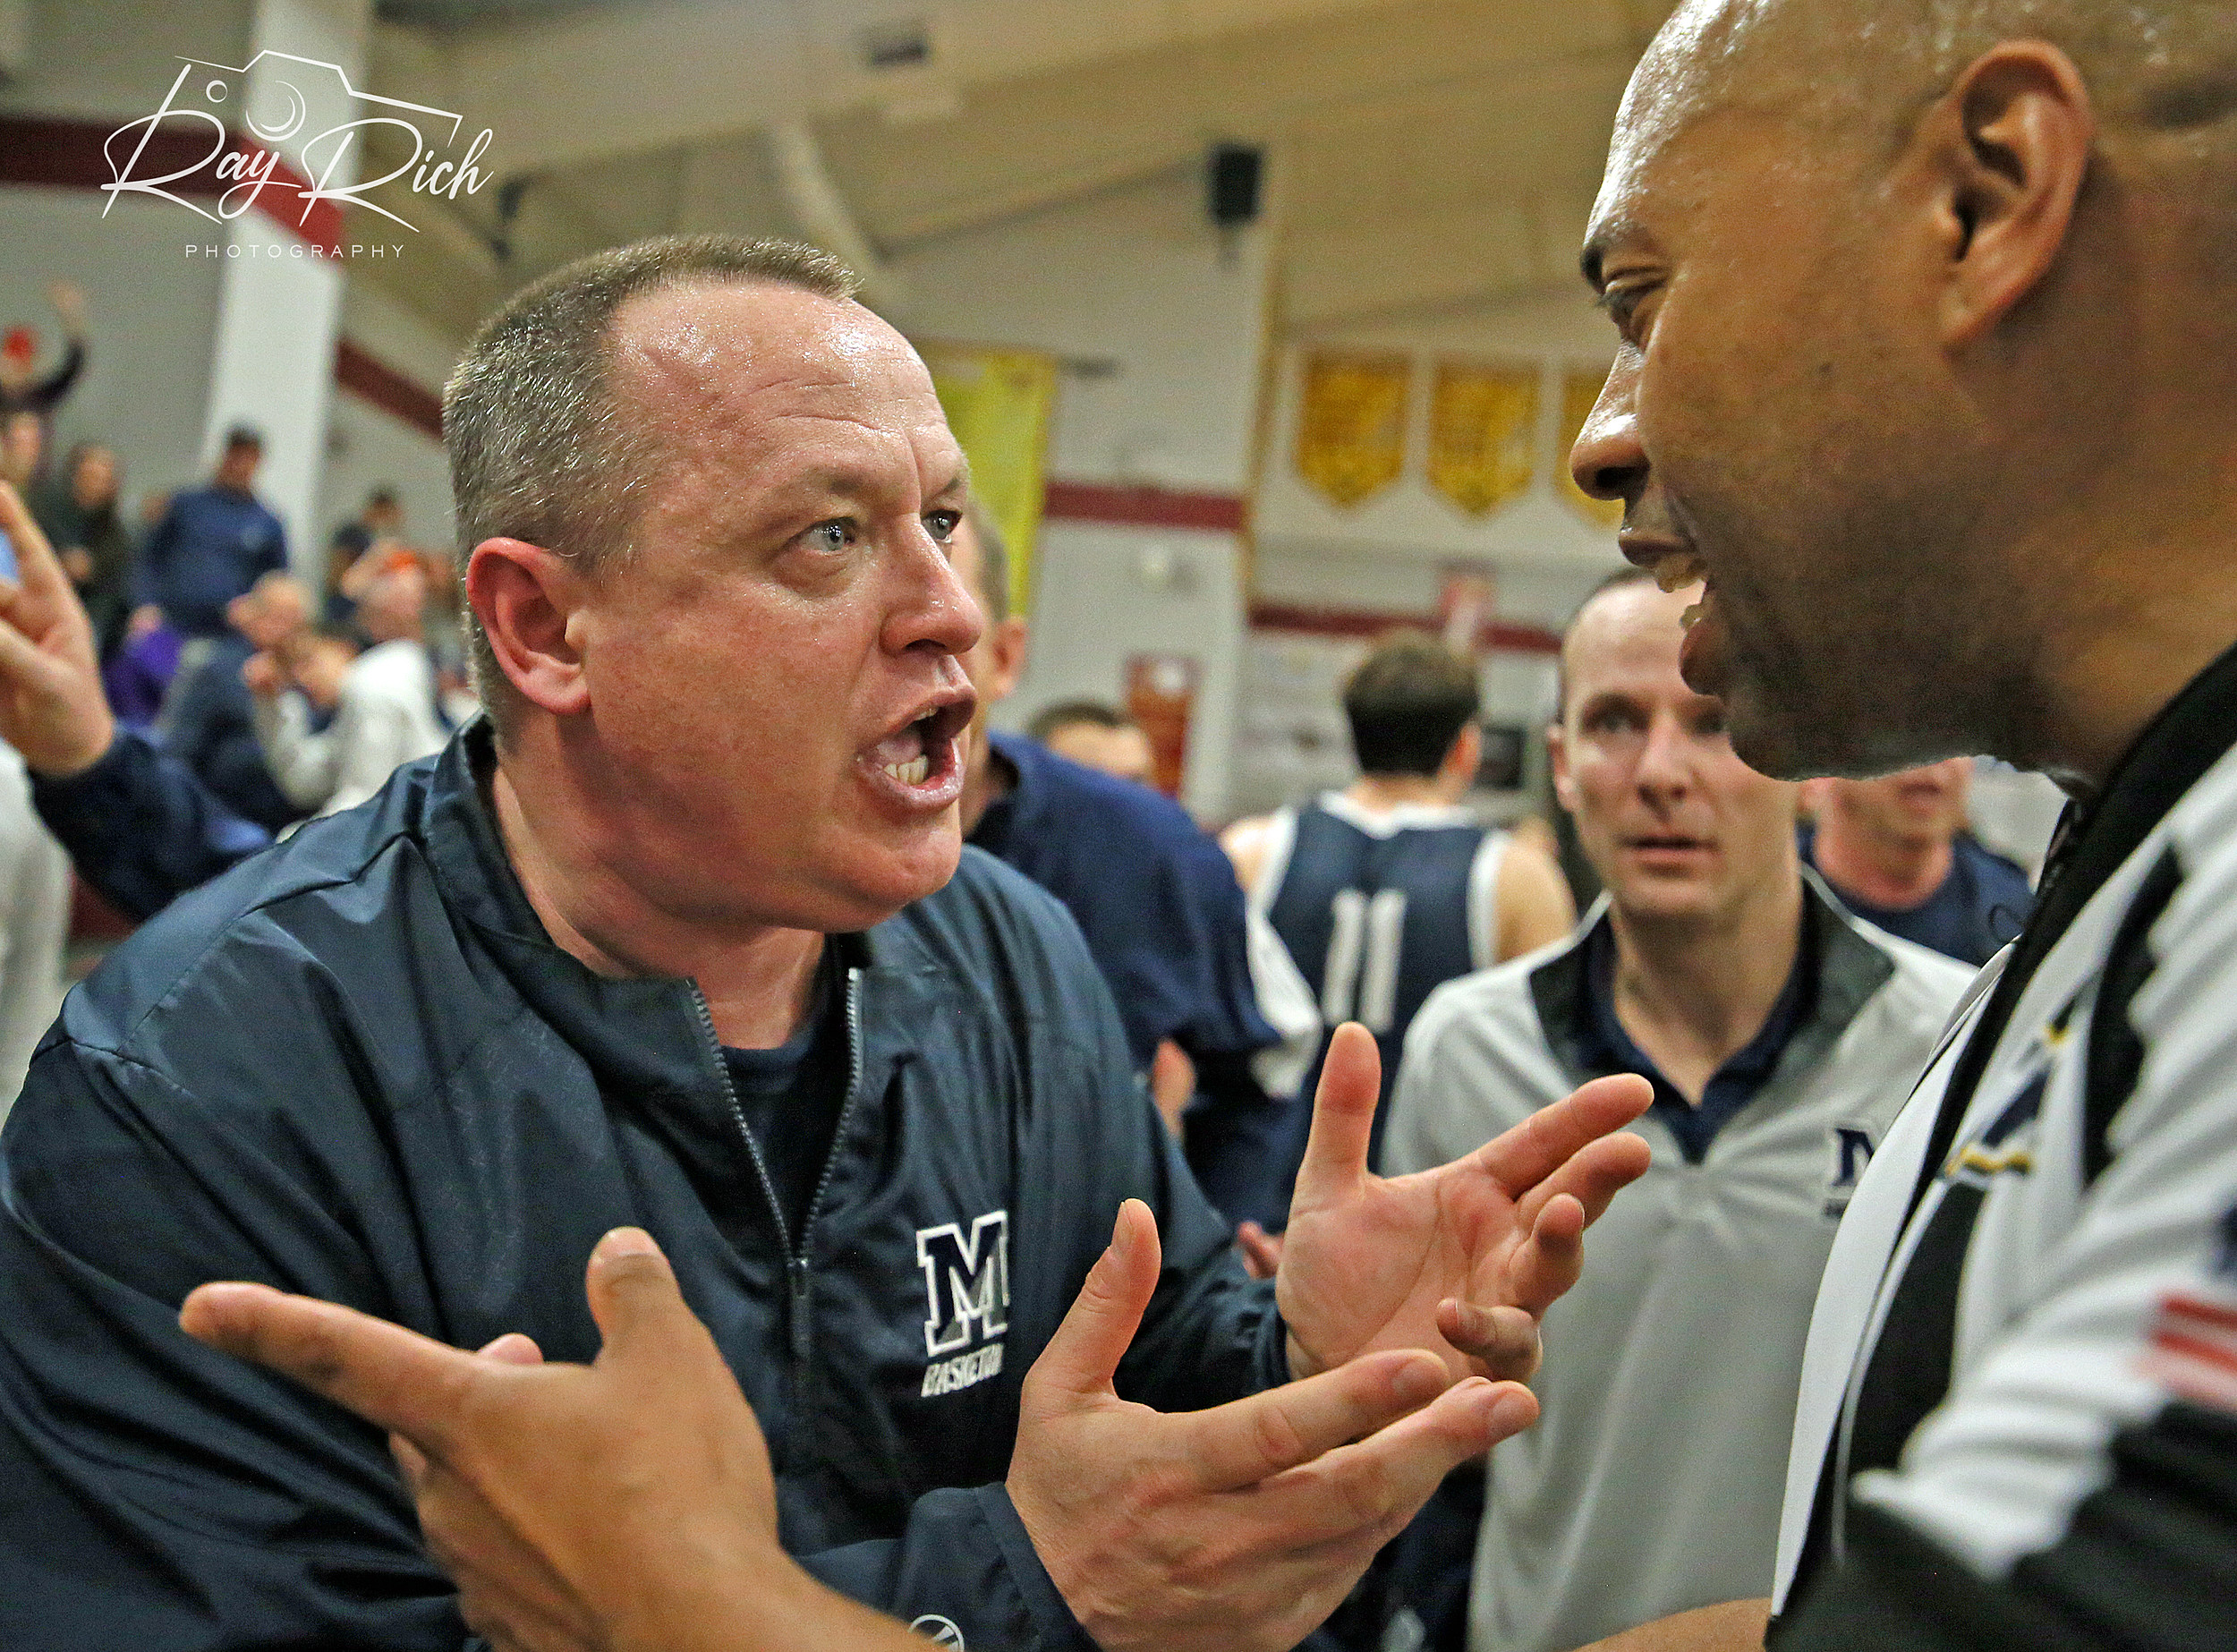 Manasquan coach Andrew Bilodeau pleads his case with one of the officials following the final decision. (Photo by Ray Rich Photography)